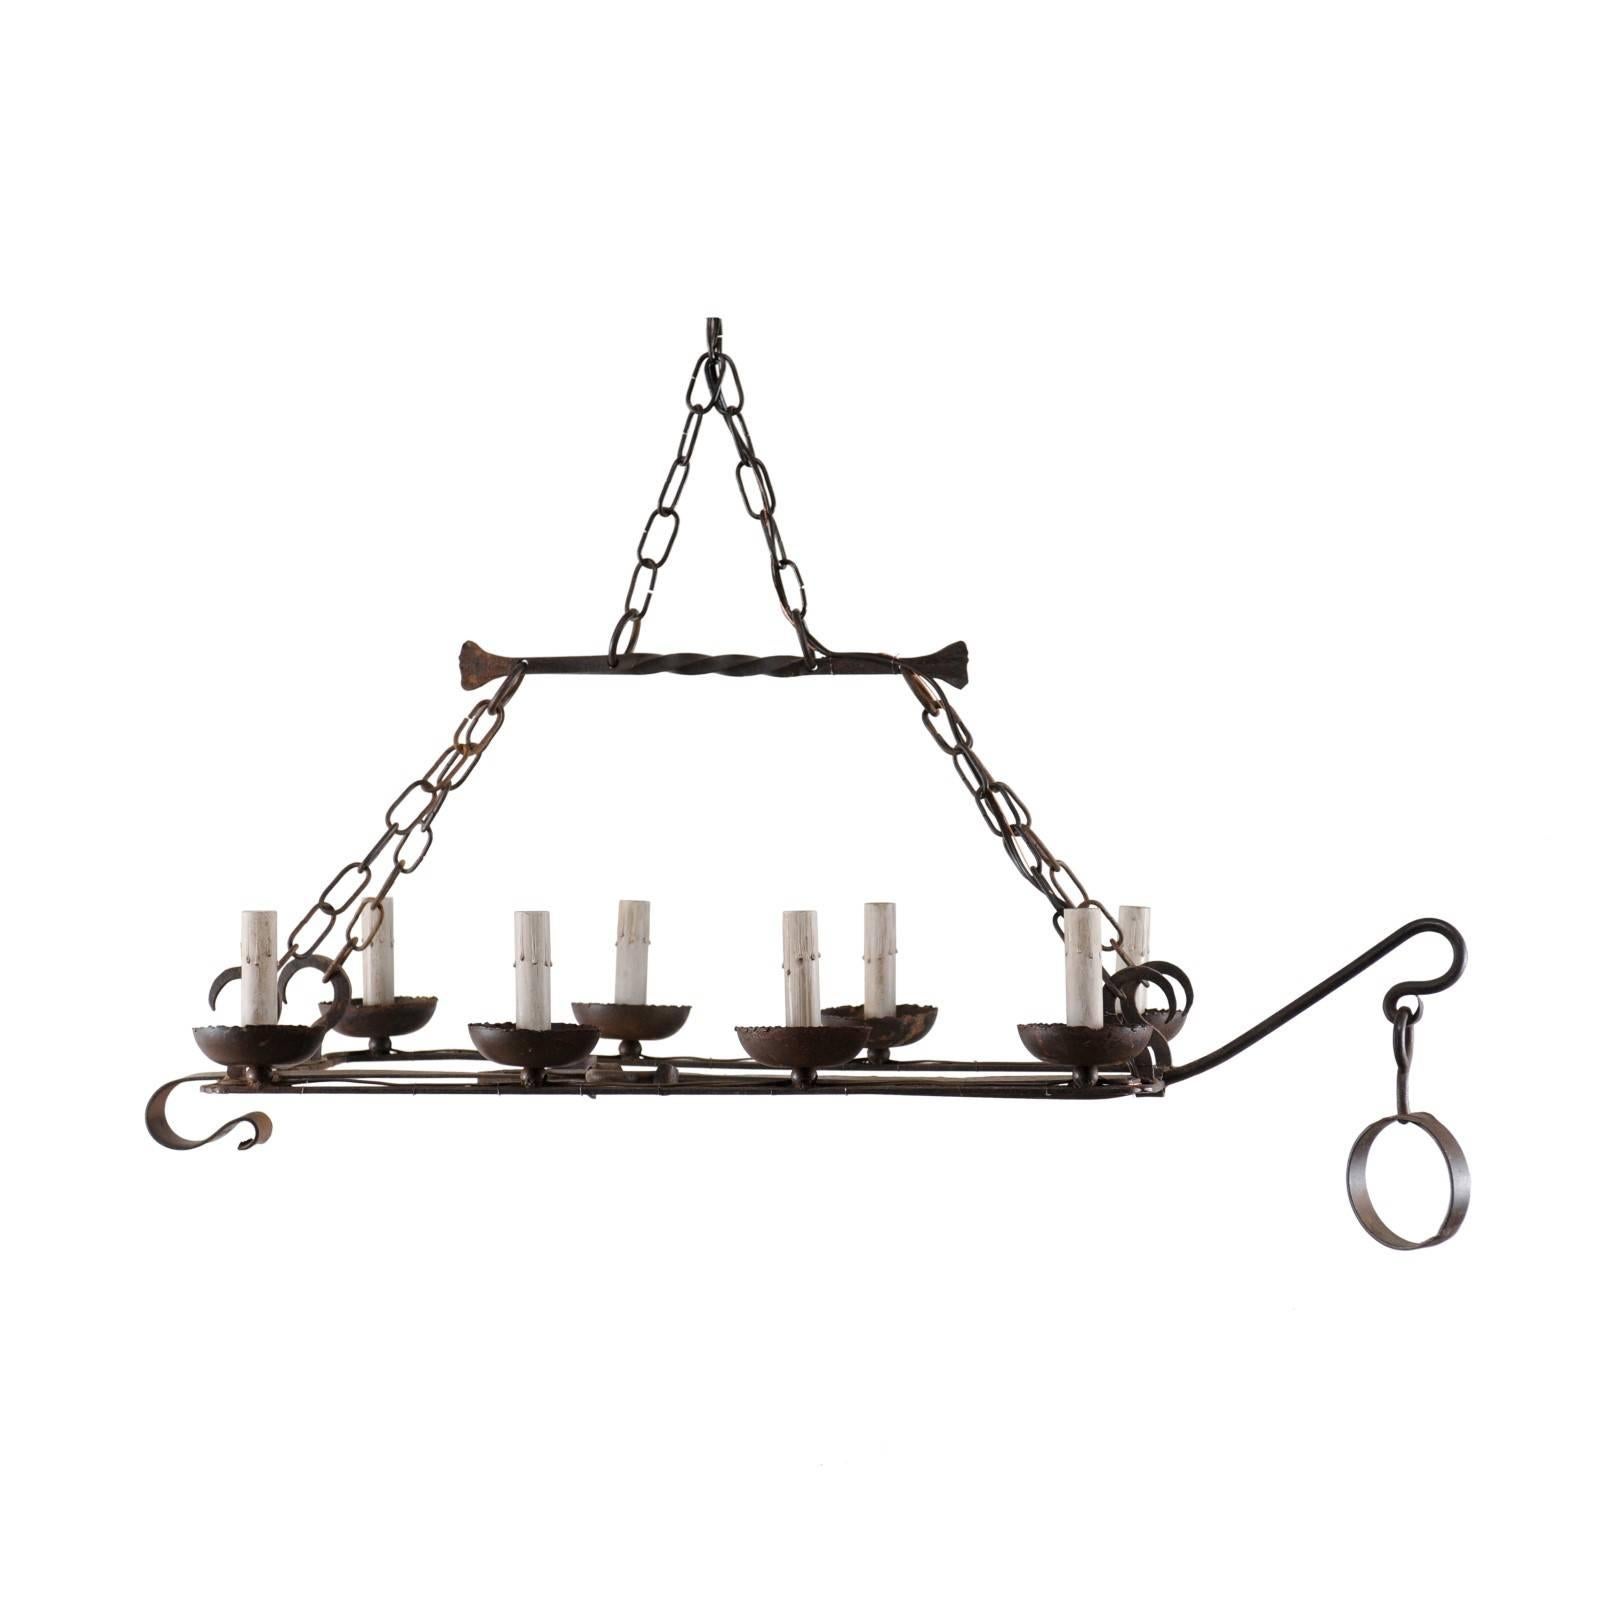 French Mid-20th Century Eight-Light Forged Iron Chandelier Made from a Spit-Jack